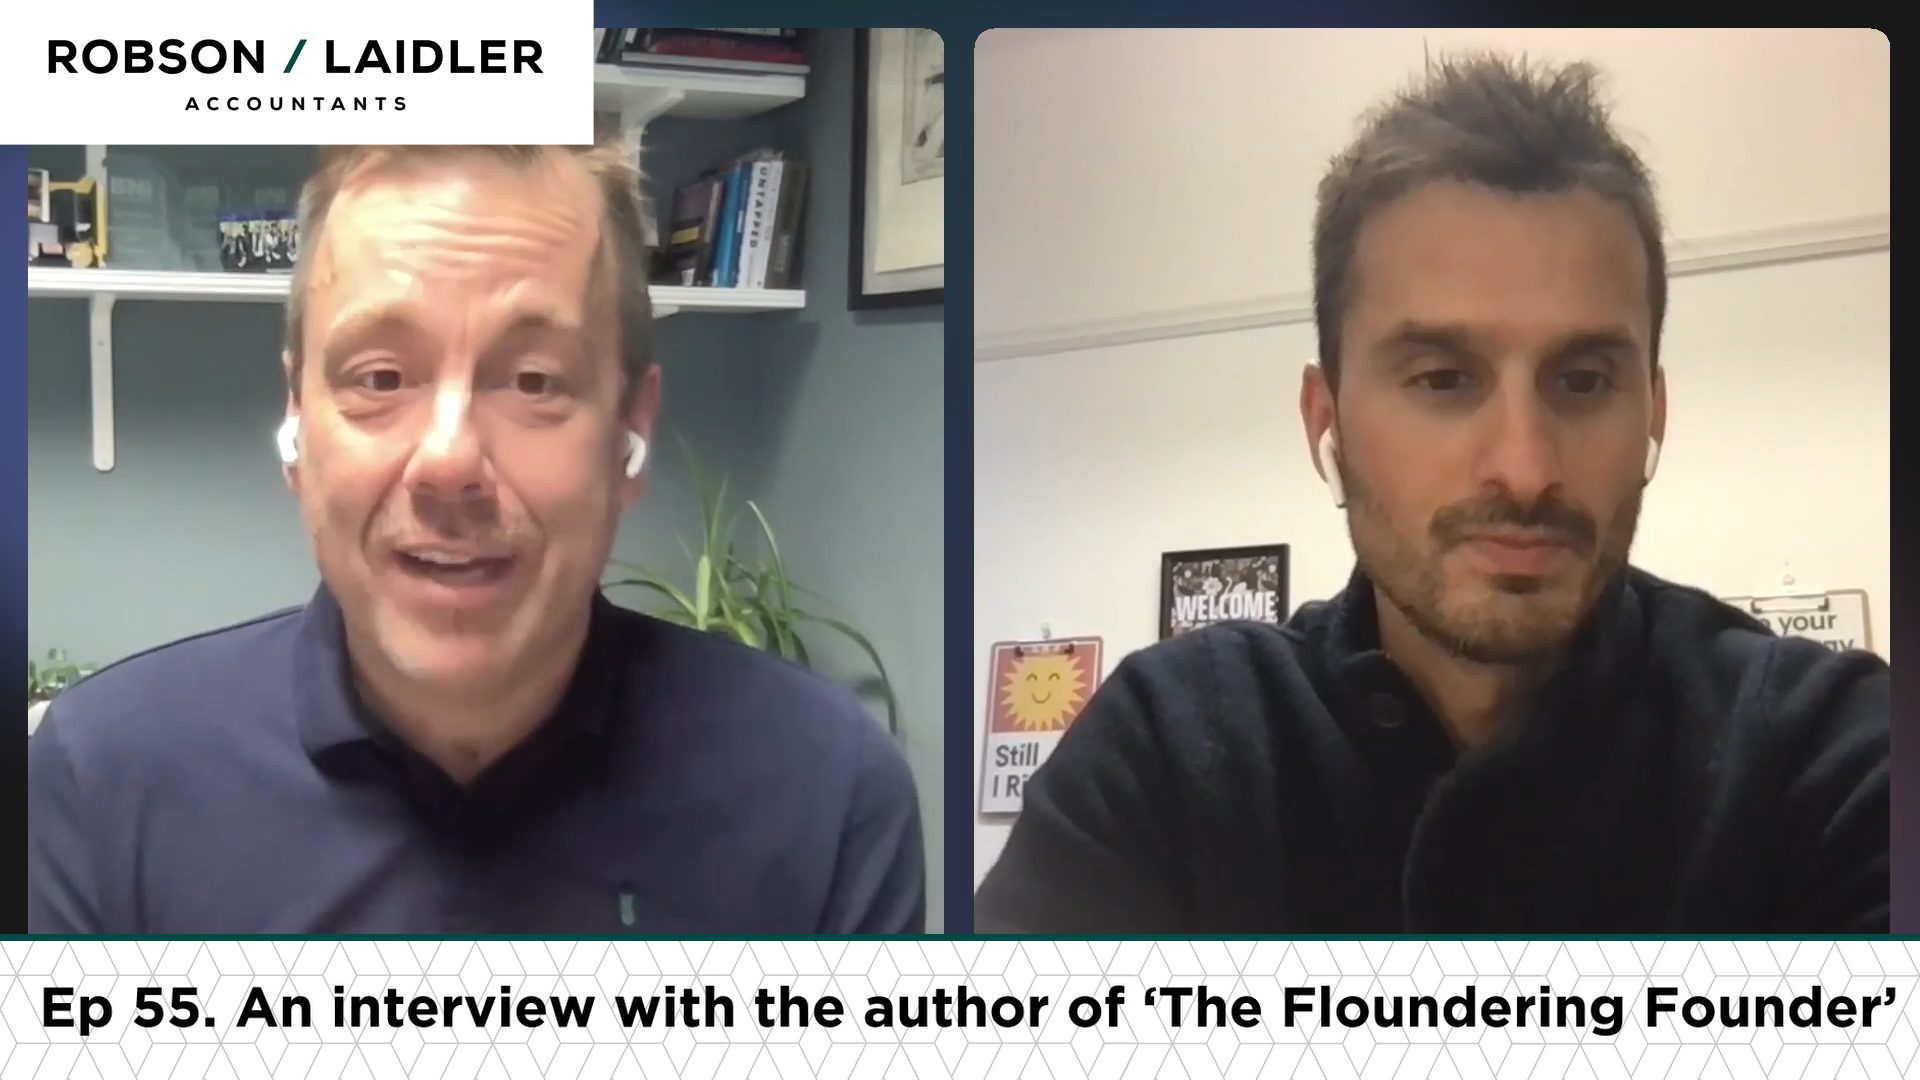 Author of The Floundering Founder interview